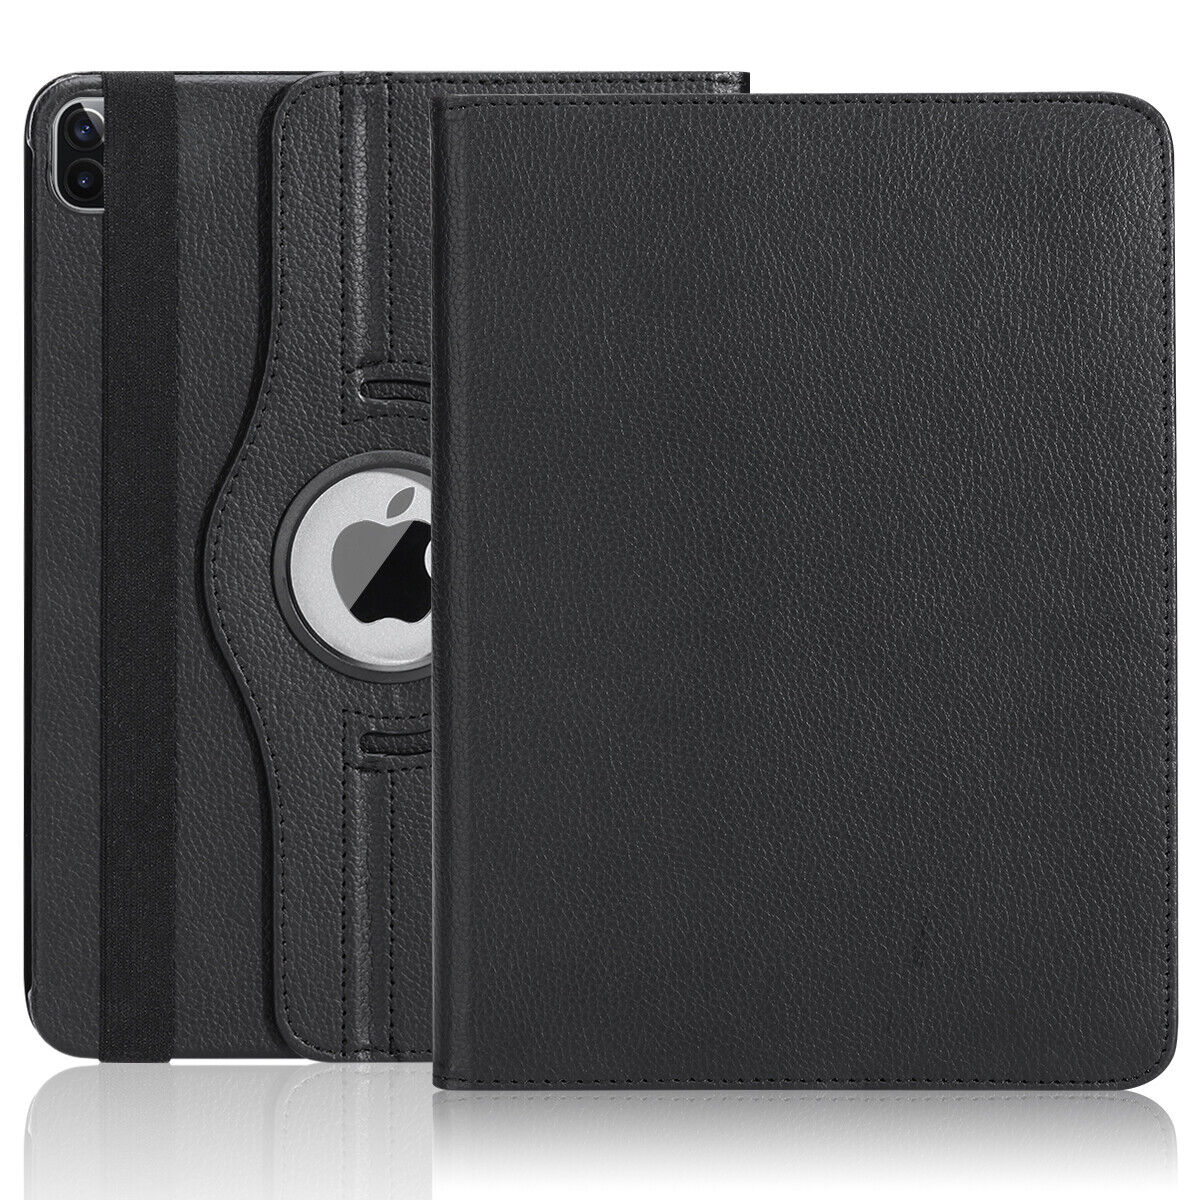 360 Folio PU Leather Cover Stand Case For Apple iPad 2 3 4 / 2nd 3rd 4th Gen 9.7